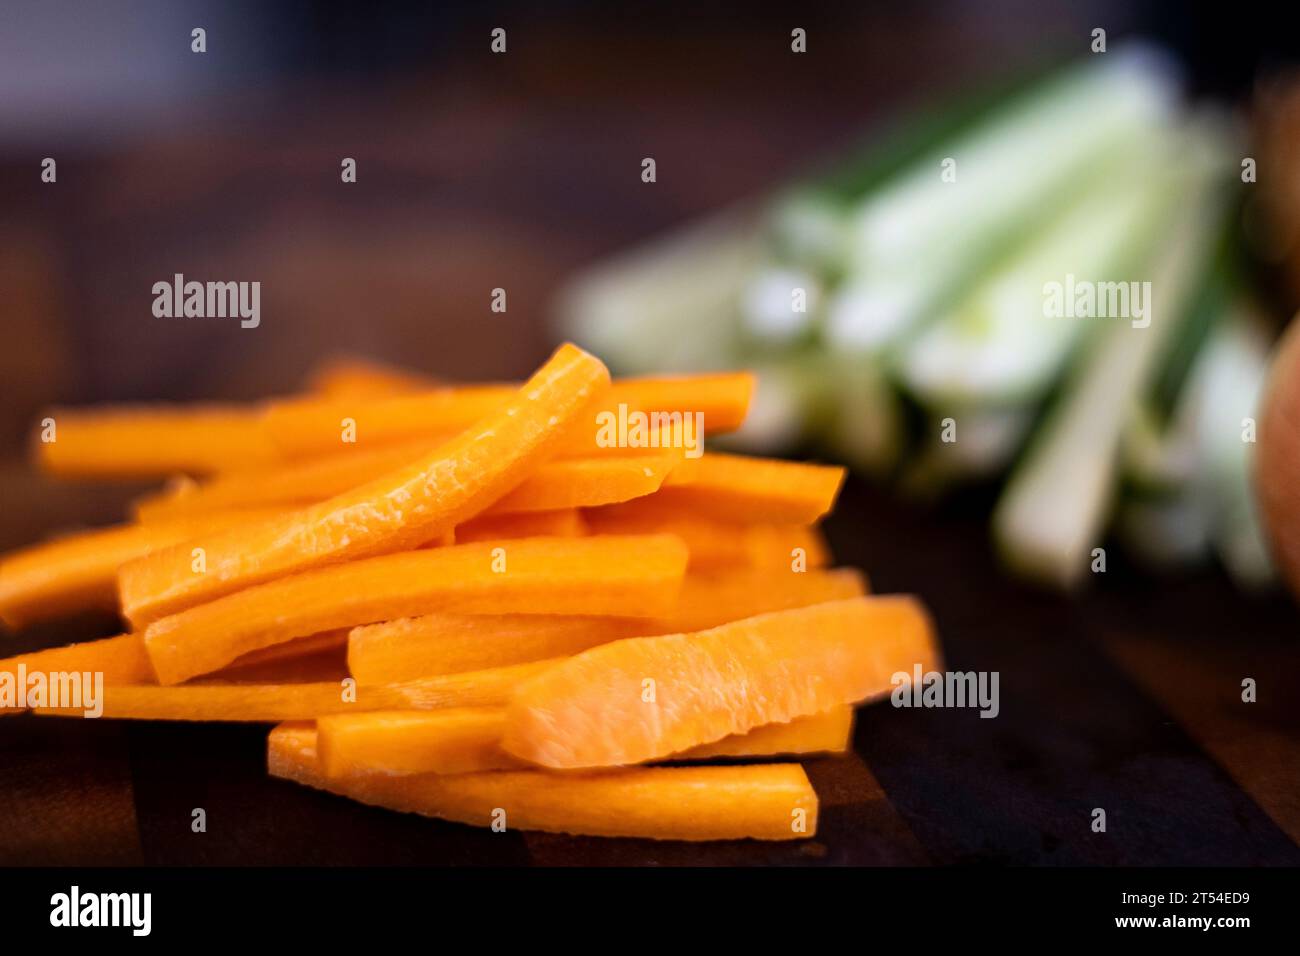 Chopped carrot on wooden board selective focus. Julienne Carrots On The Food Preparation Table. Stock Photo